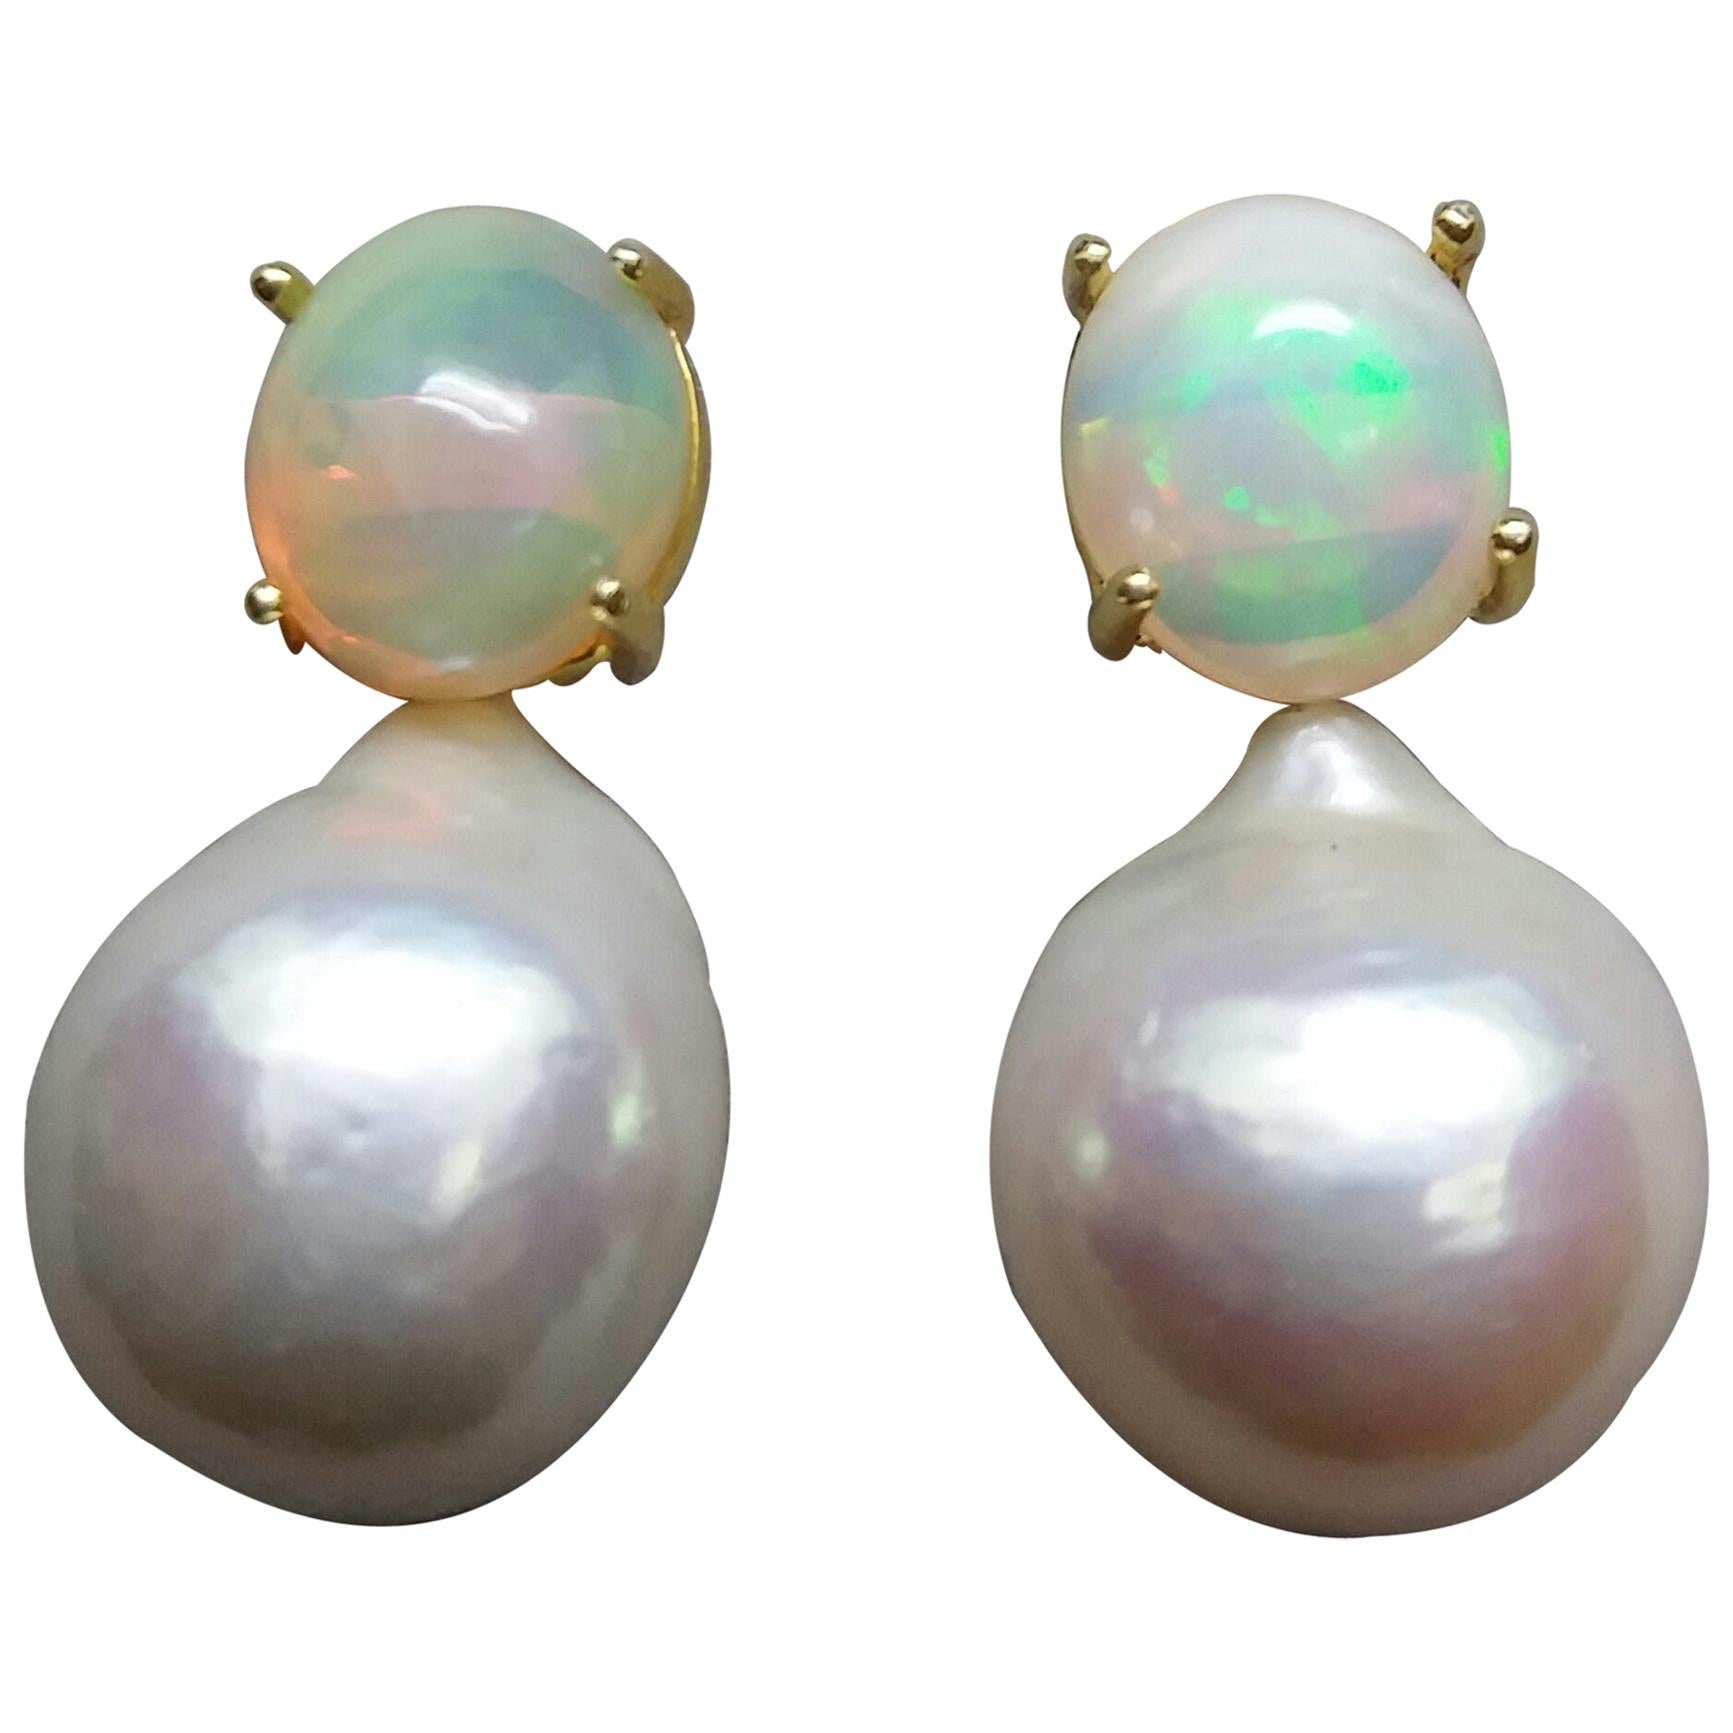 Big Size White Baroque Pearls Oval Solid Opal Cabochons Yellow Gold Earrings For Sale